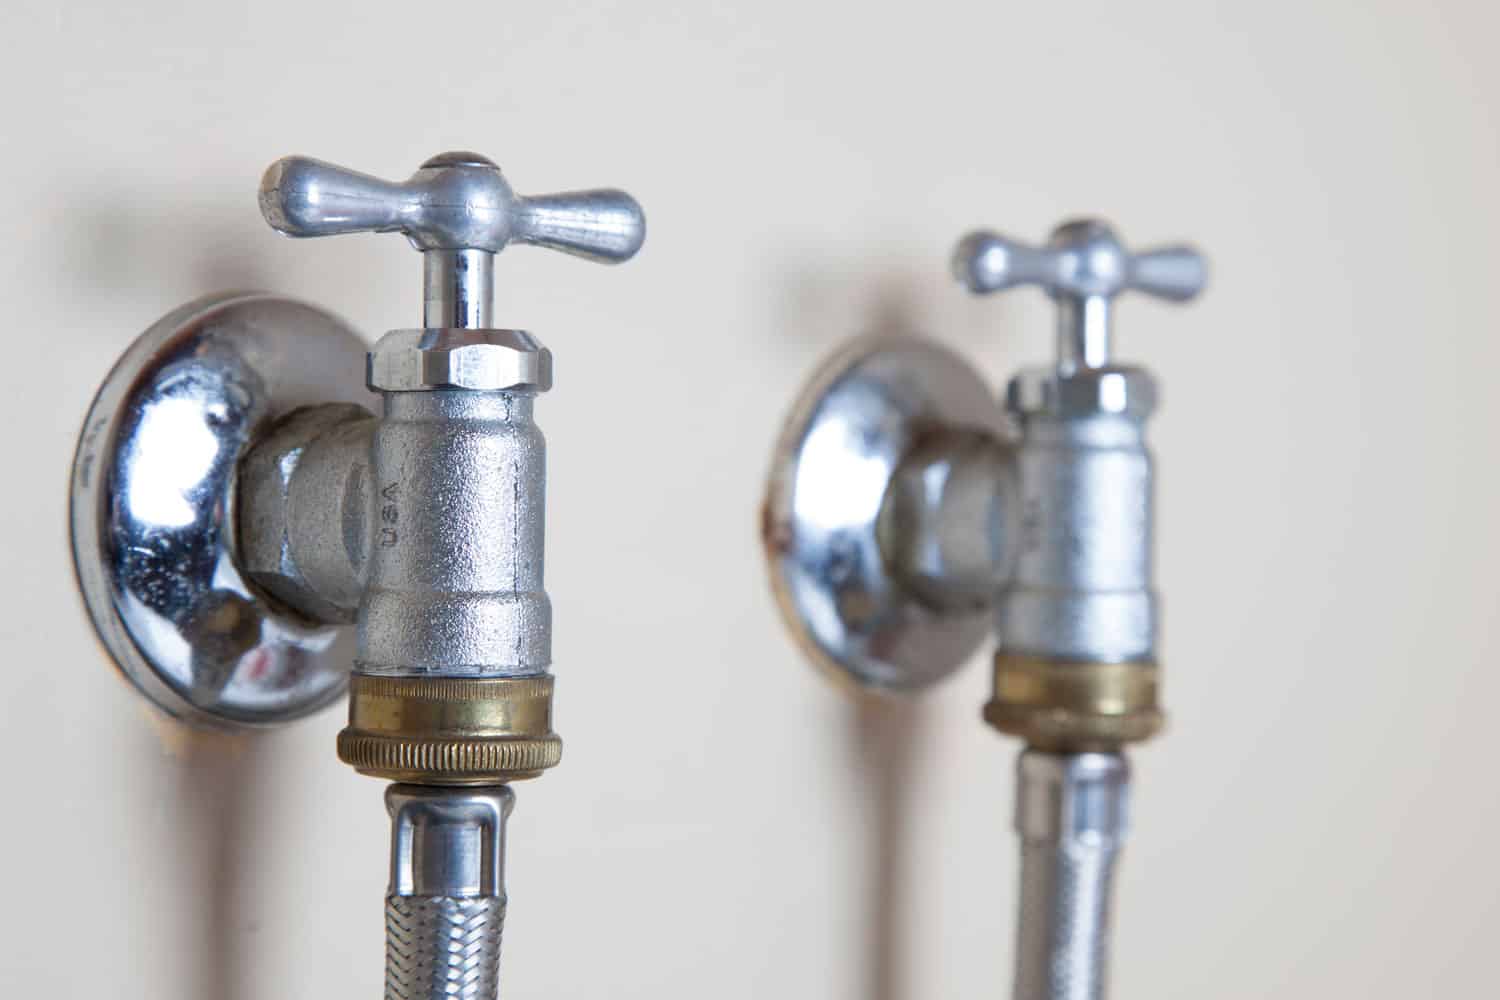 Two galvanized iron faucets for hot and cold water lines